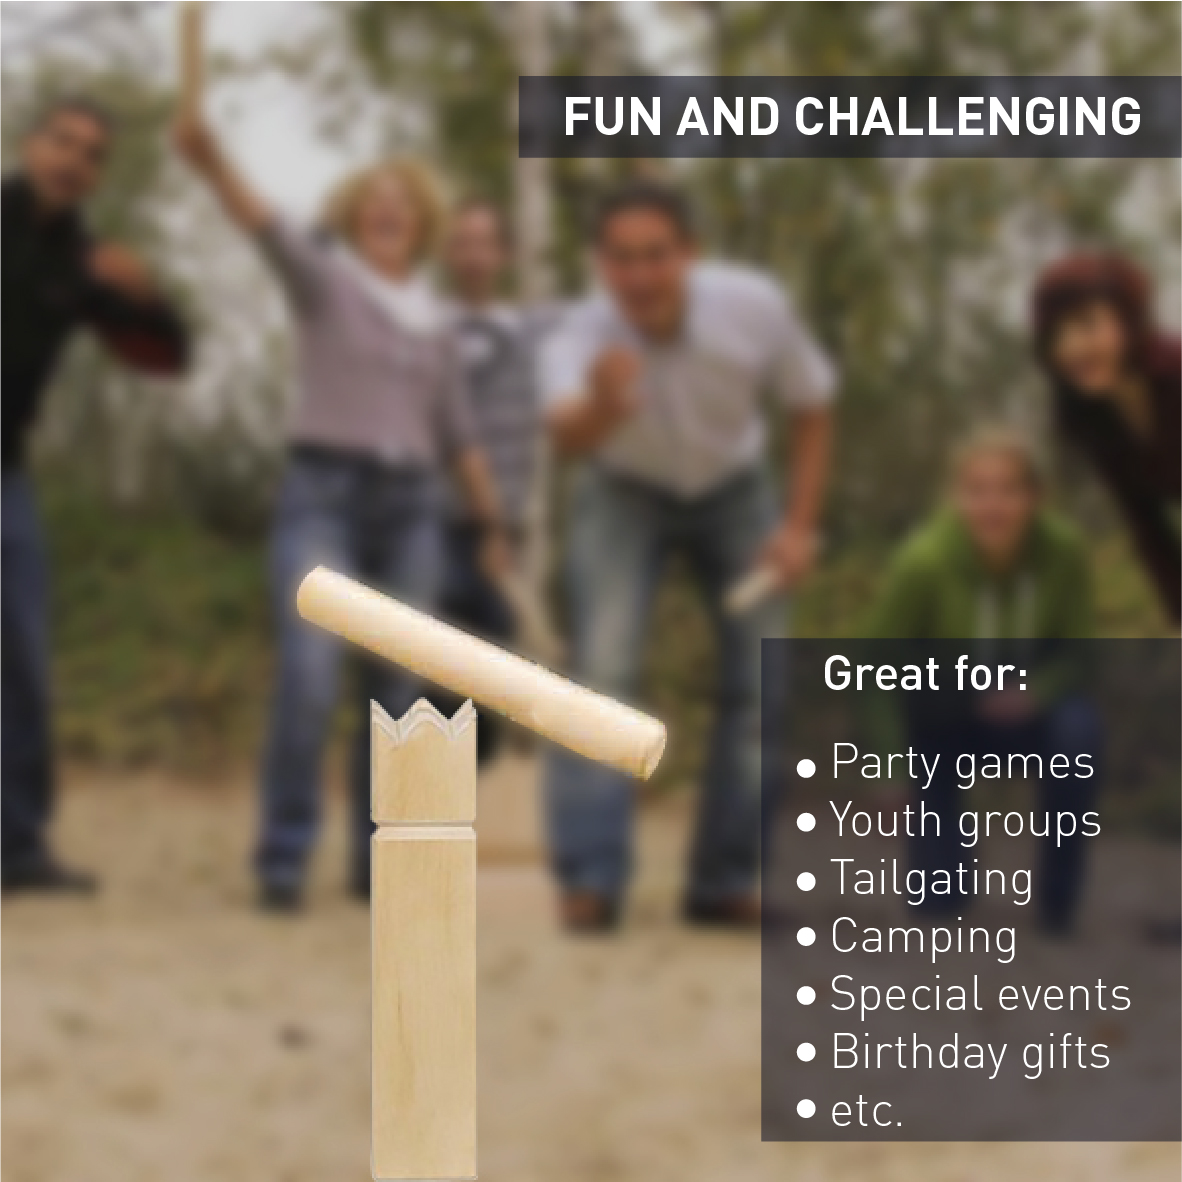 Kubb The Viking Wooden Outdoor Lawn Game  1 King, 10 Kubb Blocks, 6 Long Batons, 4 Corner Markers & Carrying Bag - image 3 of 4